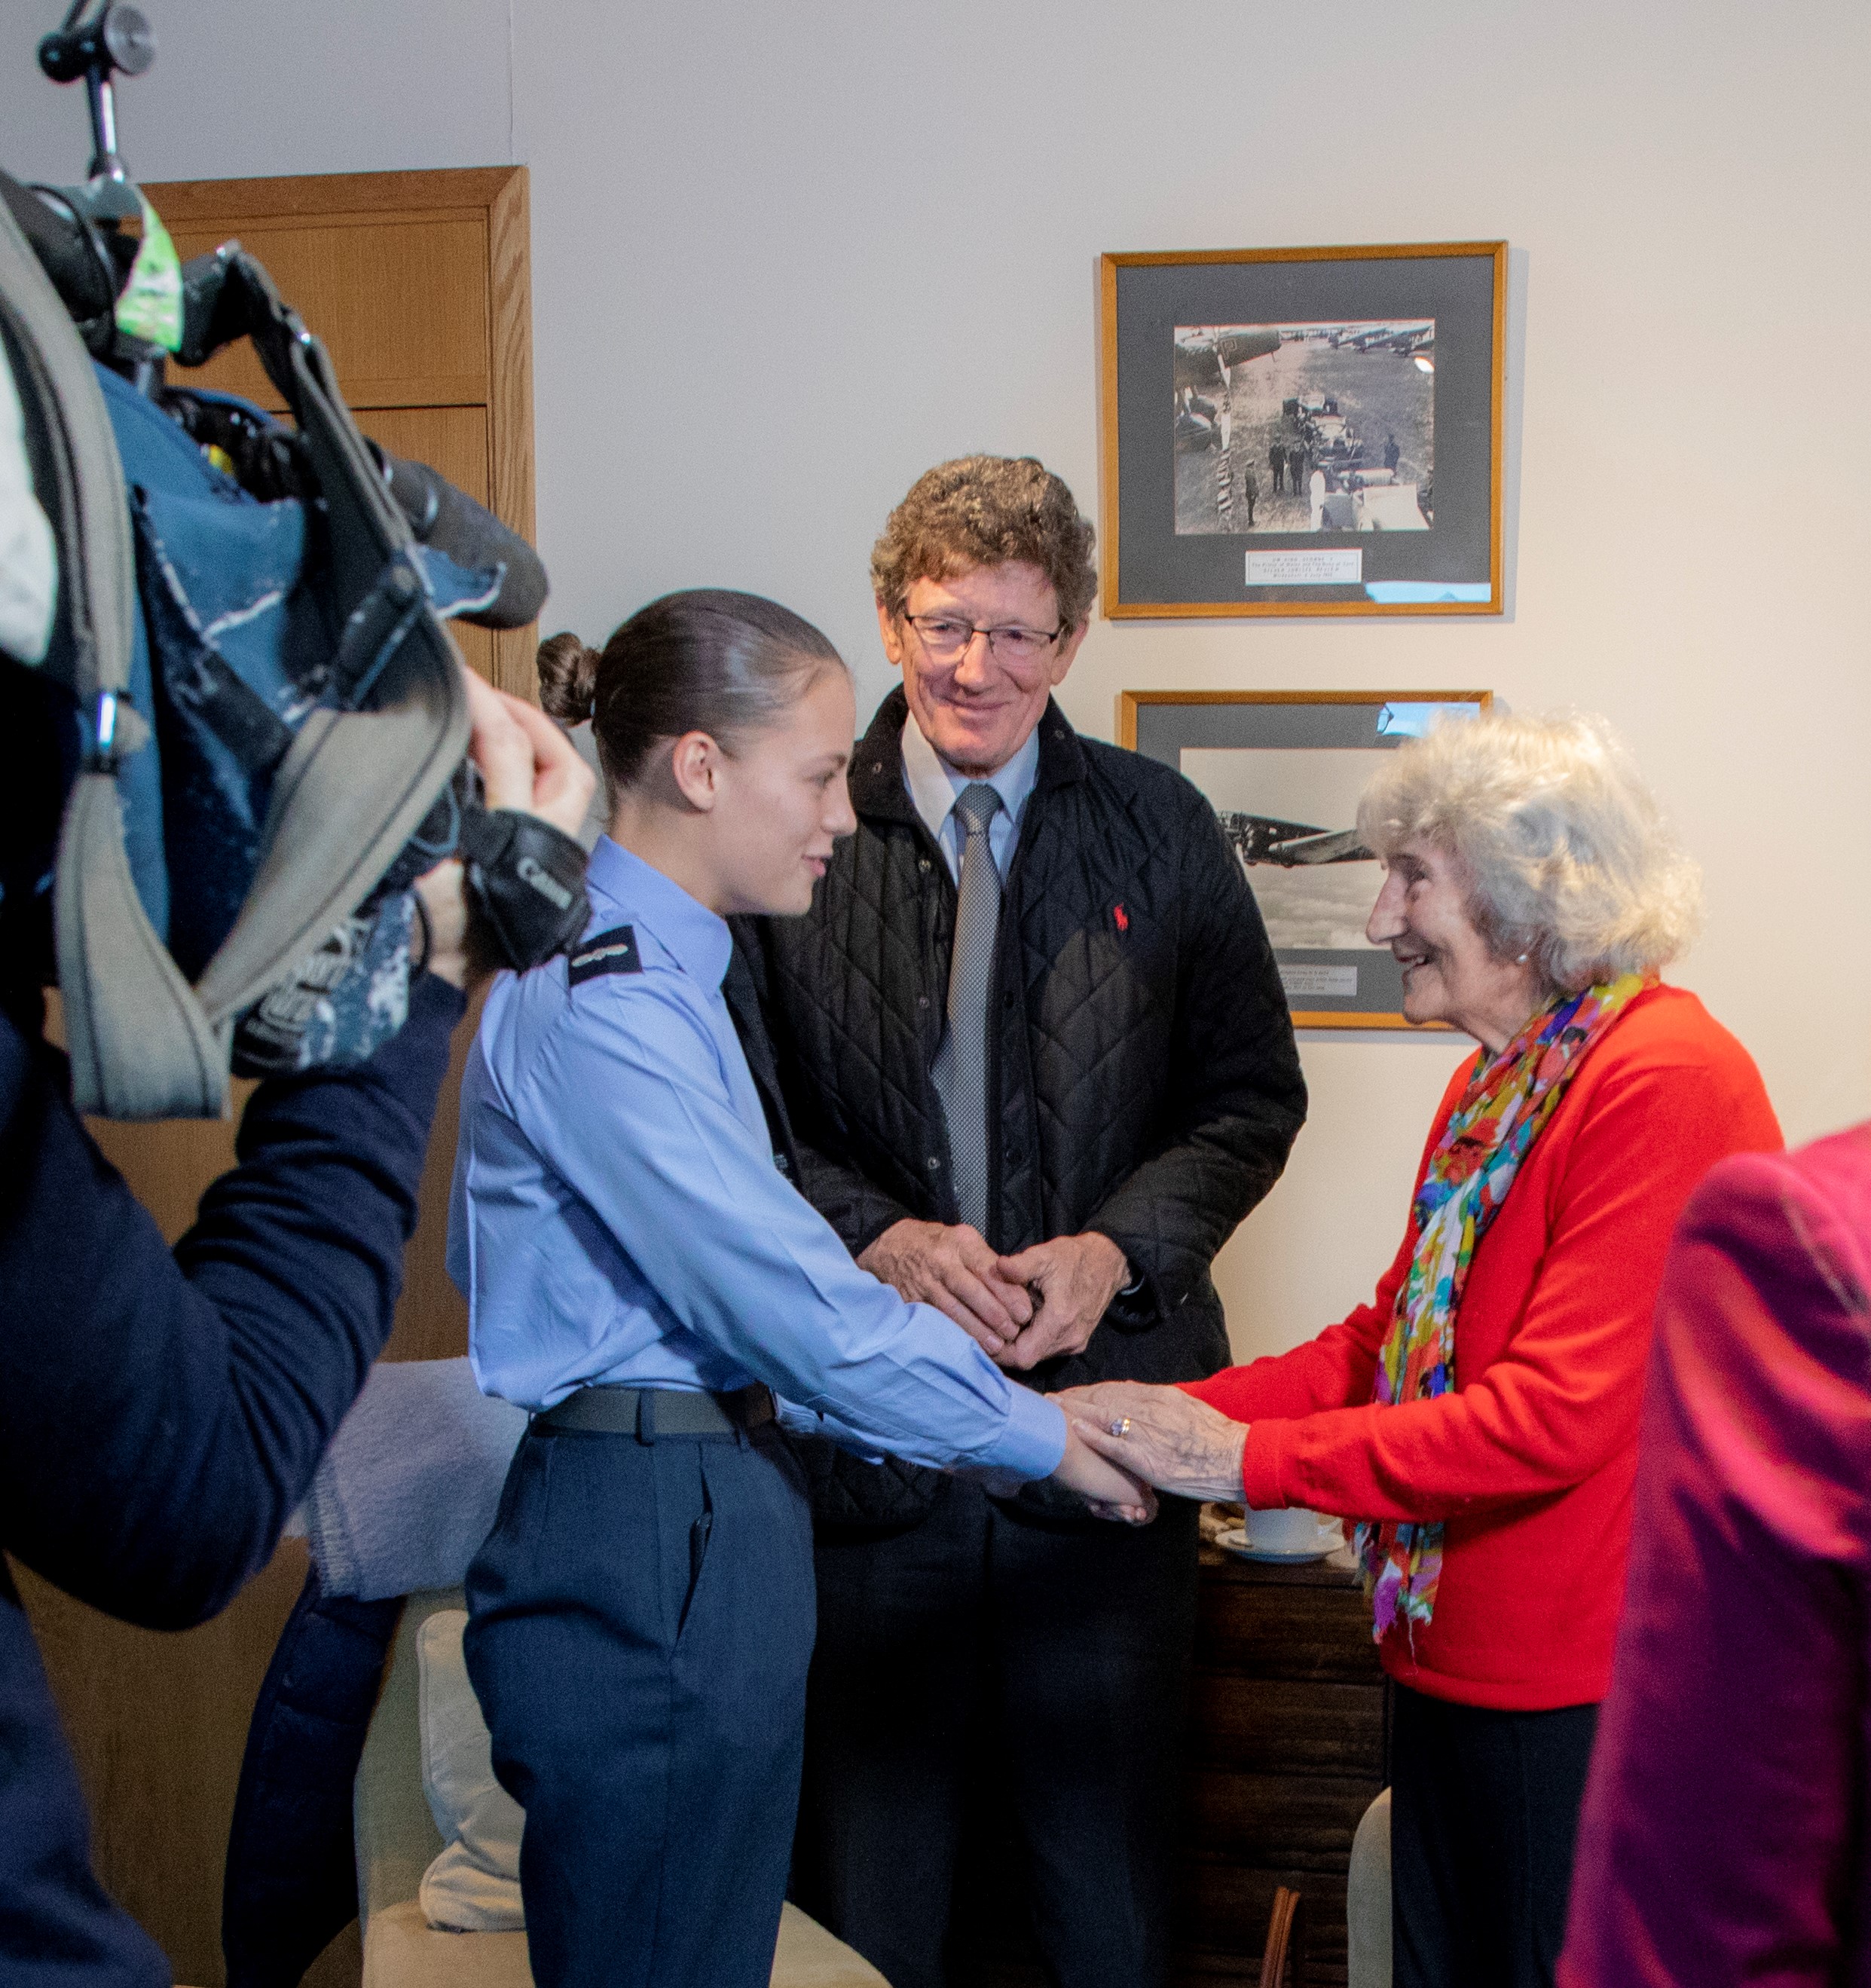 Image shows Veteran shaking hands with RAF aviators, as camera takes pictures.